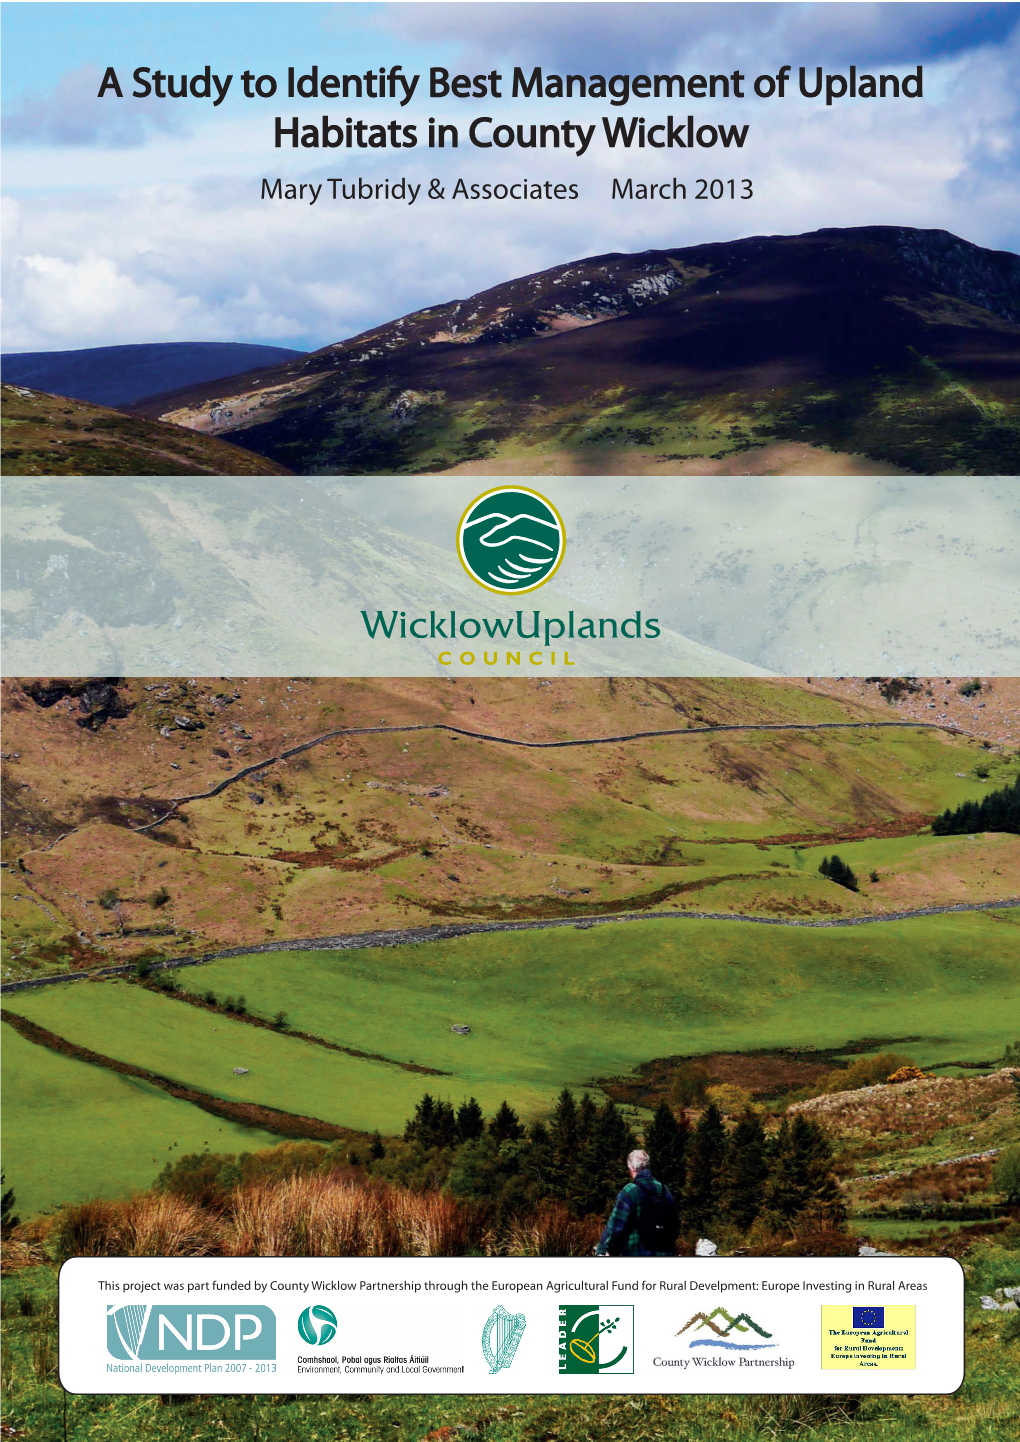 A Study to Identify Best Management of Upland Habitats in County Wicklow Mary Tubridy & Associates March 2013